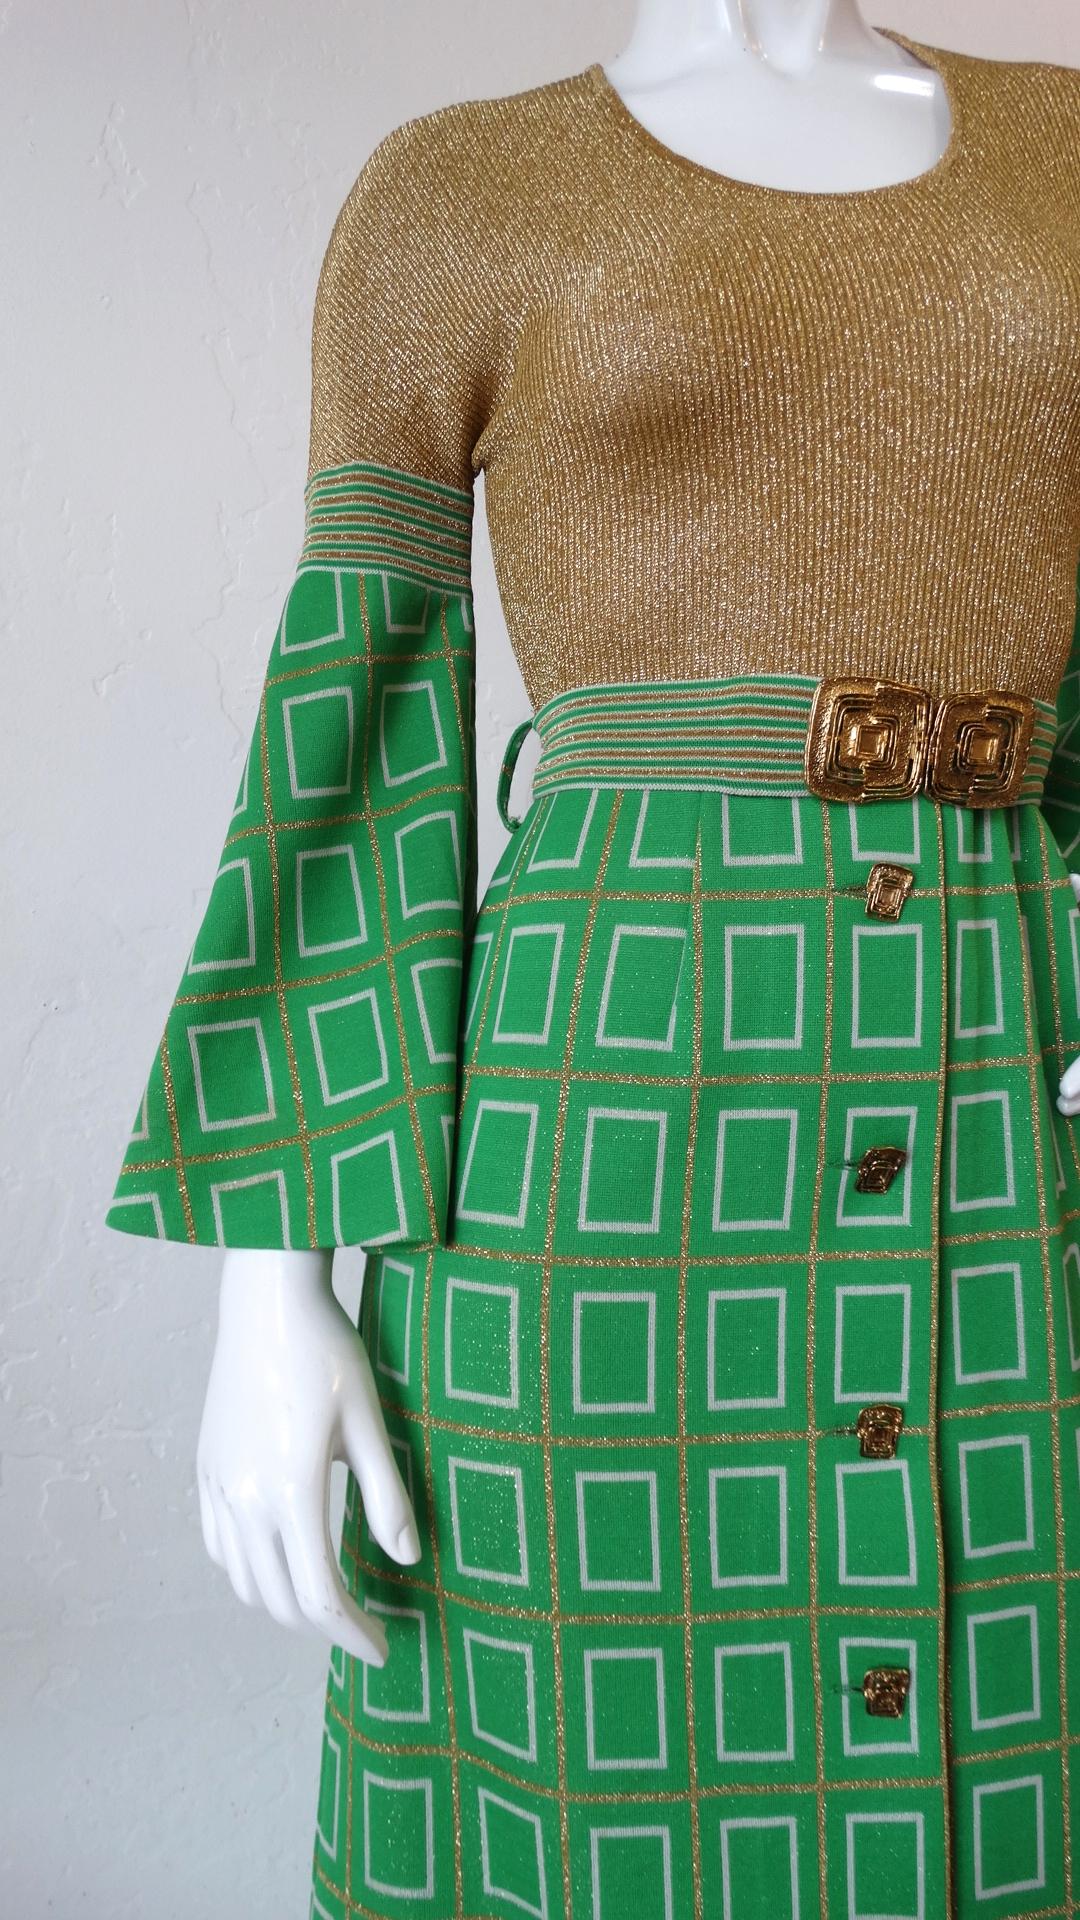 Rock some vintage evening wear with our incredible 1960s lurex dress from Israeli designer Aled Couture! Gold lurex knit bodice contrasted by green and gold geometric printed flounce sleeves! Matching printed maxi length skirt with gold metal